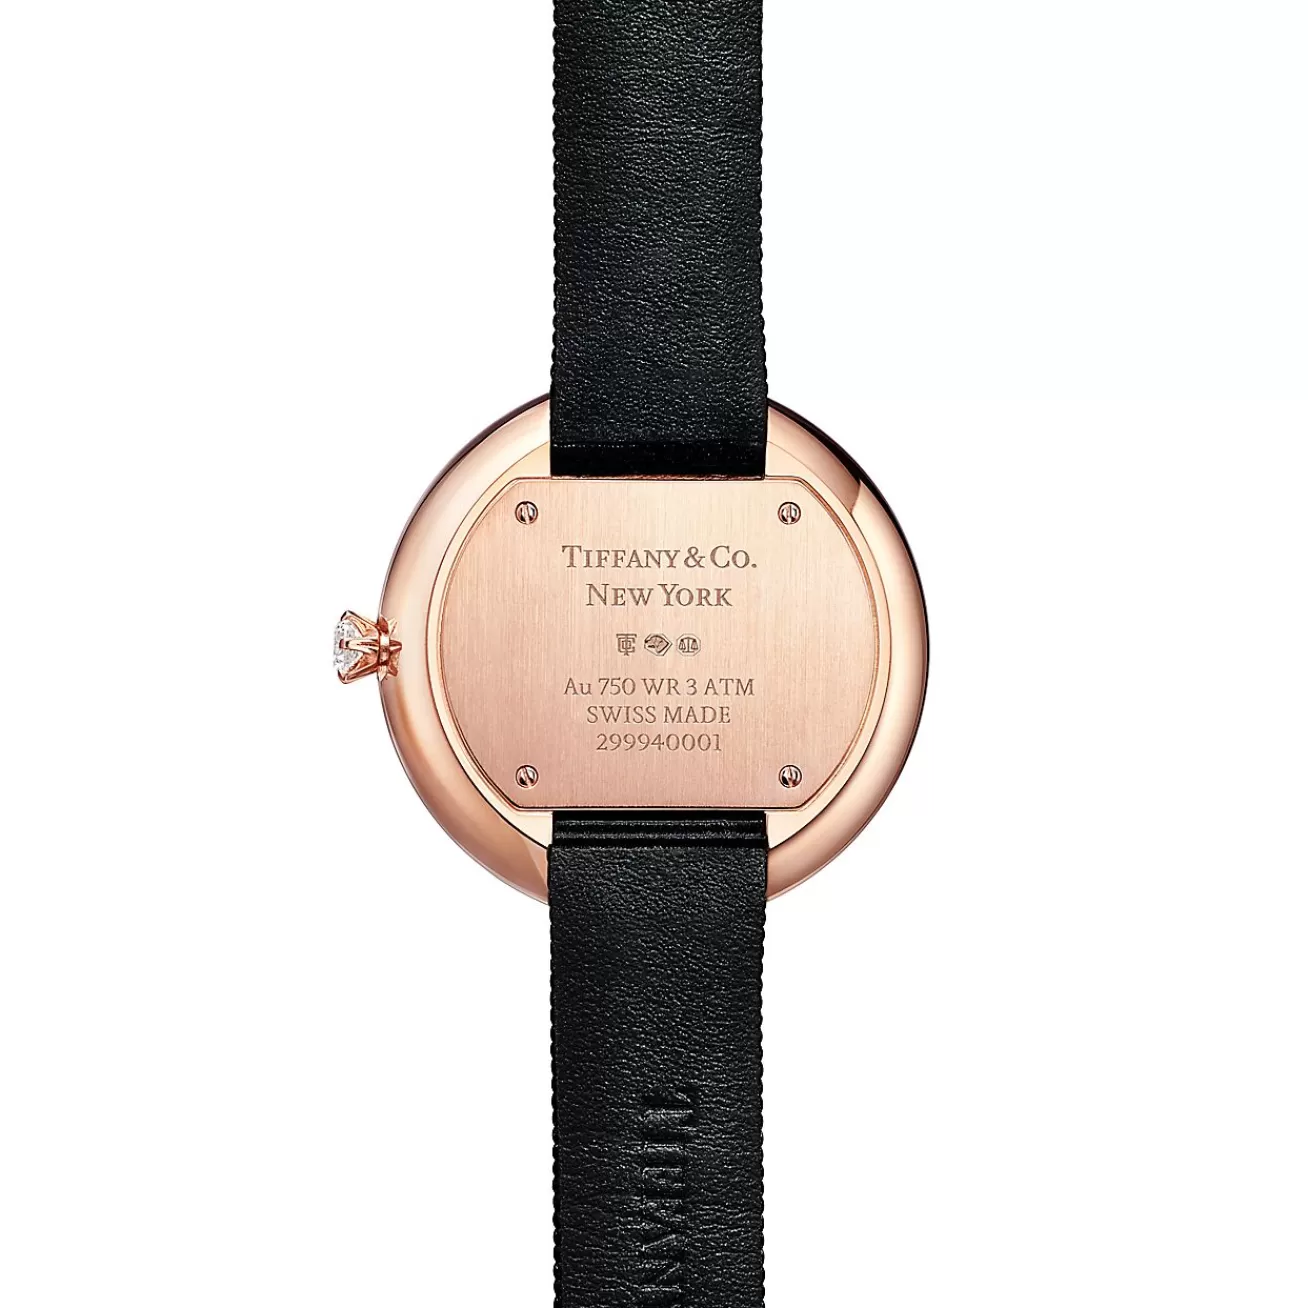 Tiffany & Co. Tiffany Eternity 32 mm Round Watch in Rose Gold with Diamonds | ^Women Fine Watches | Women’s Watches